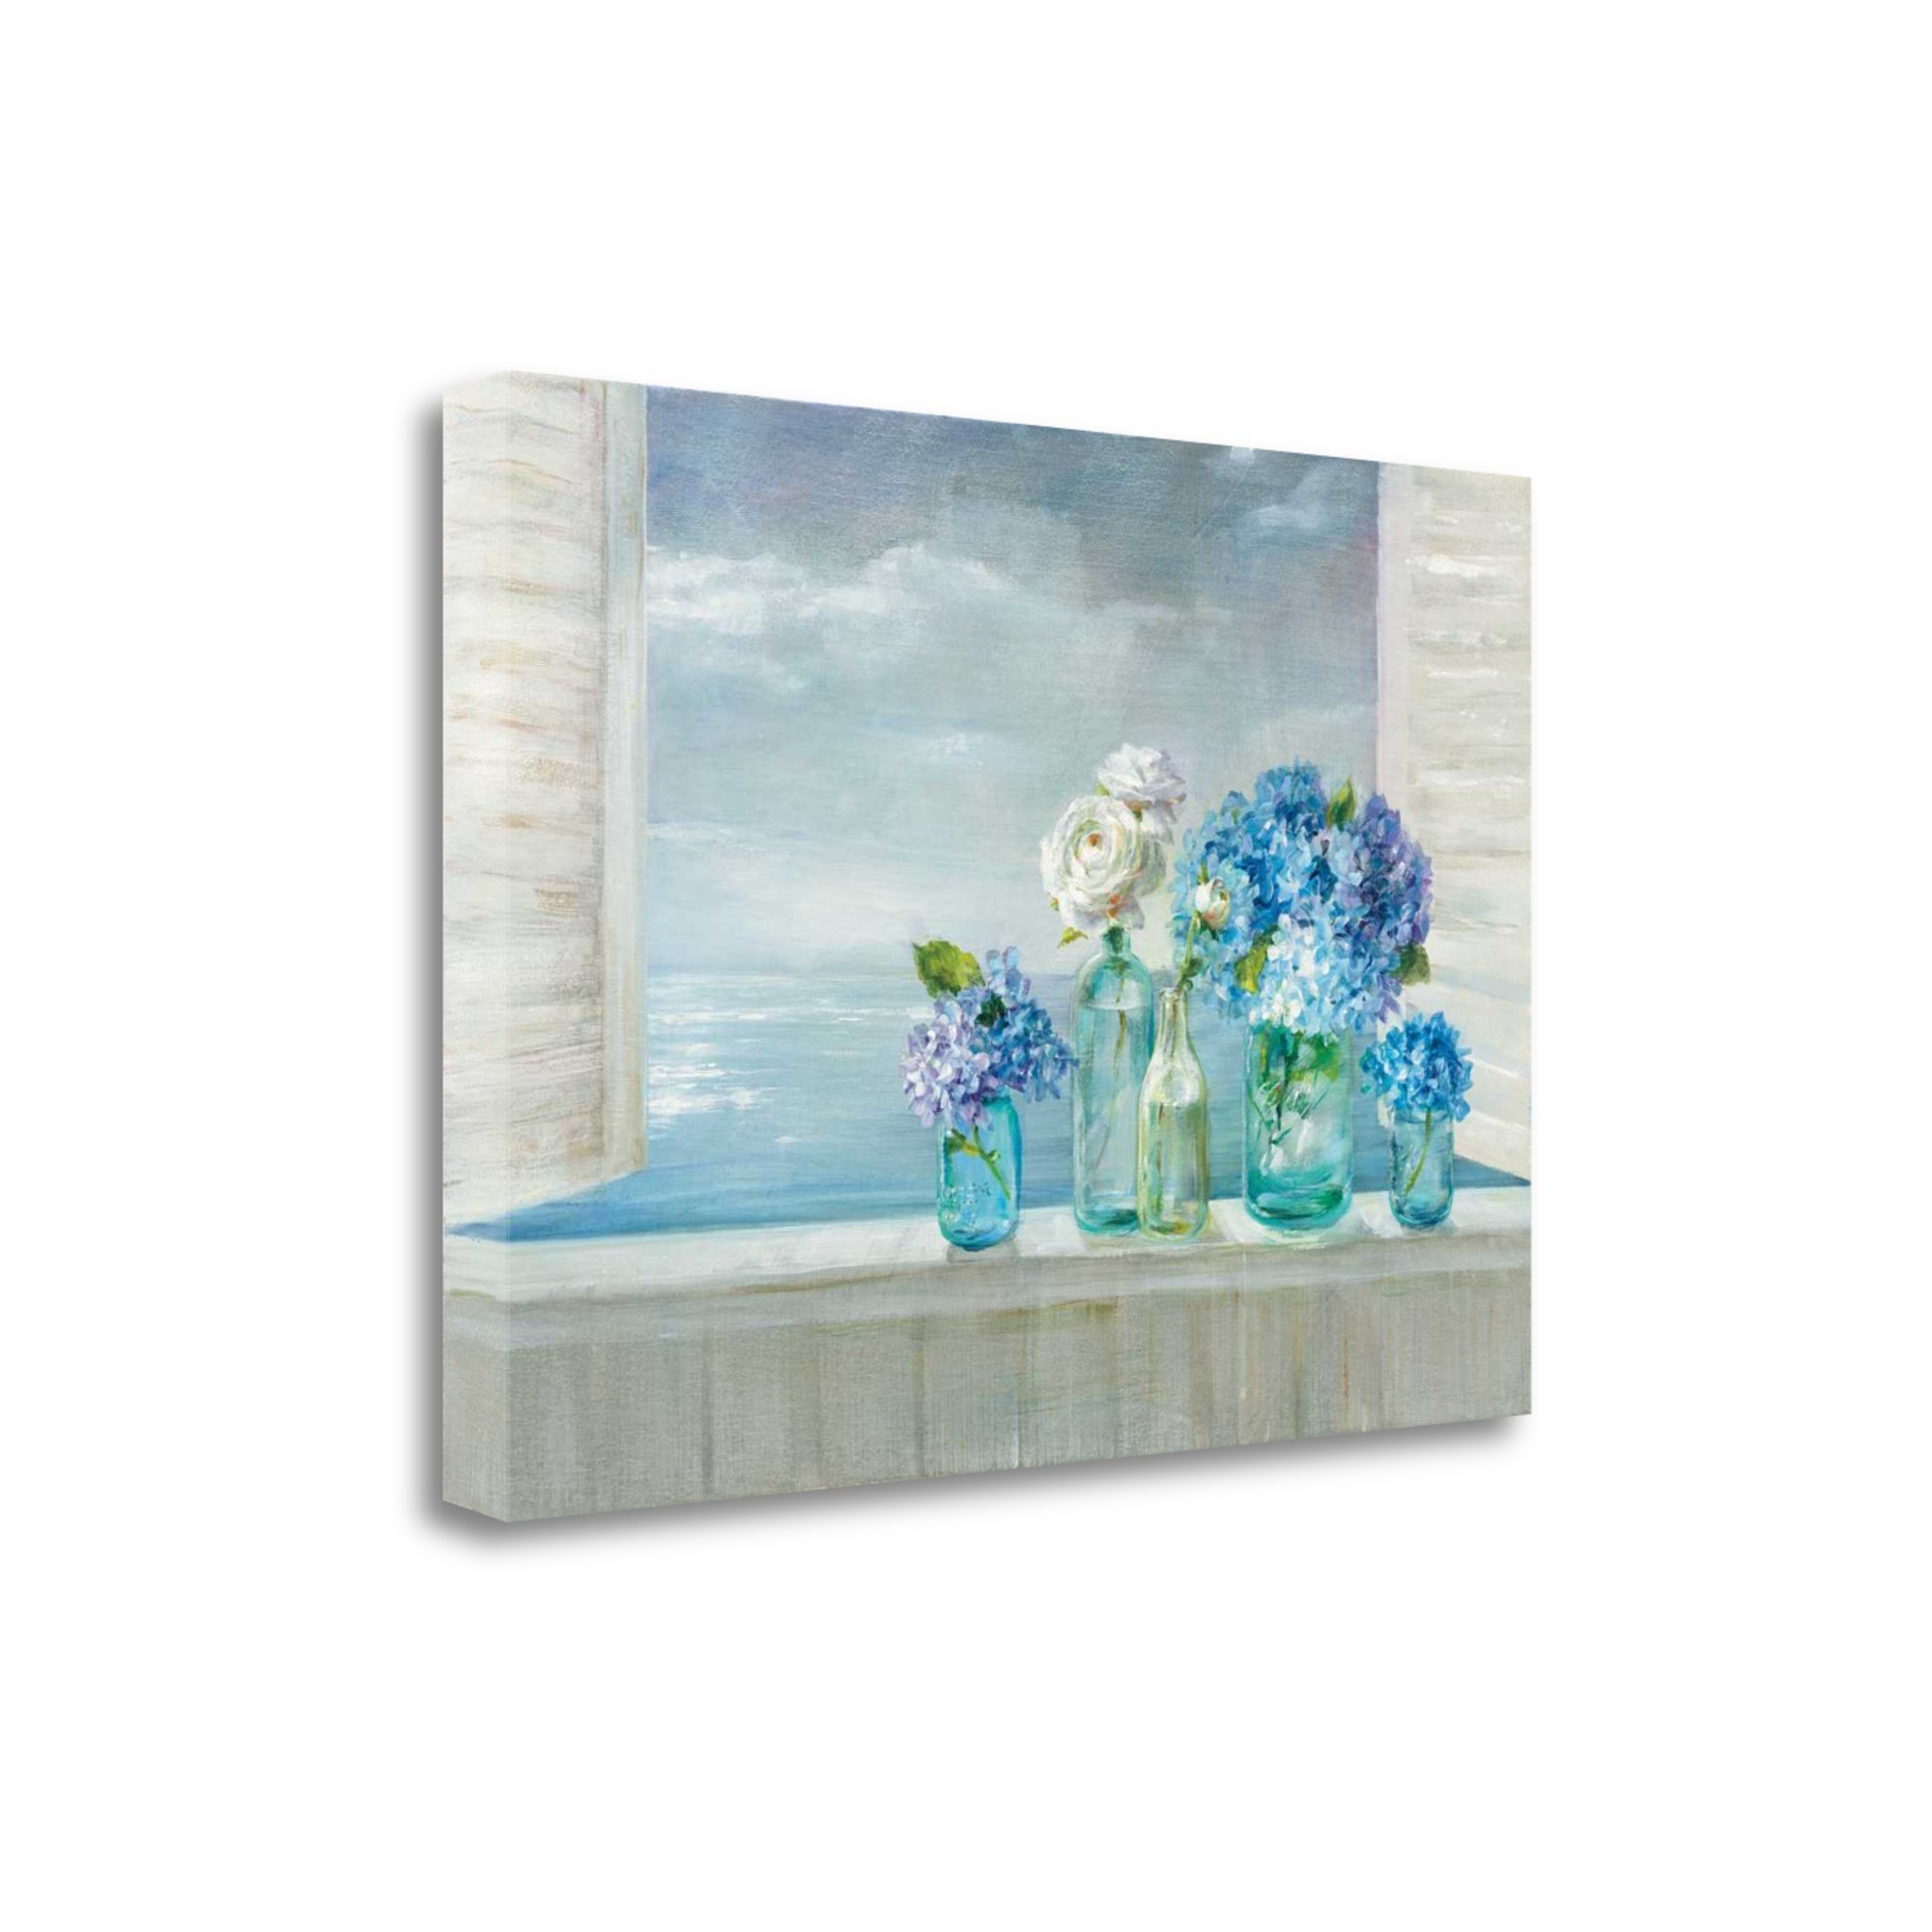 Ocean View with Flowers 5 Giclee Wrap Canvas Wall Art